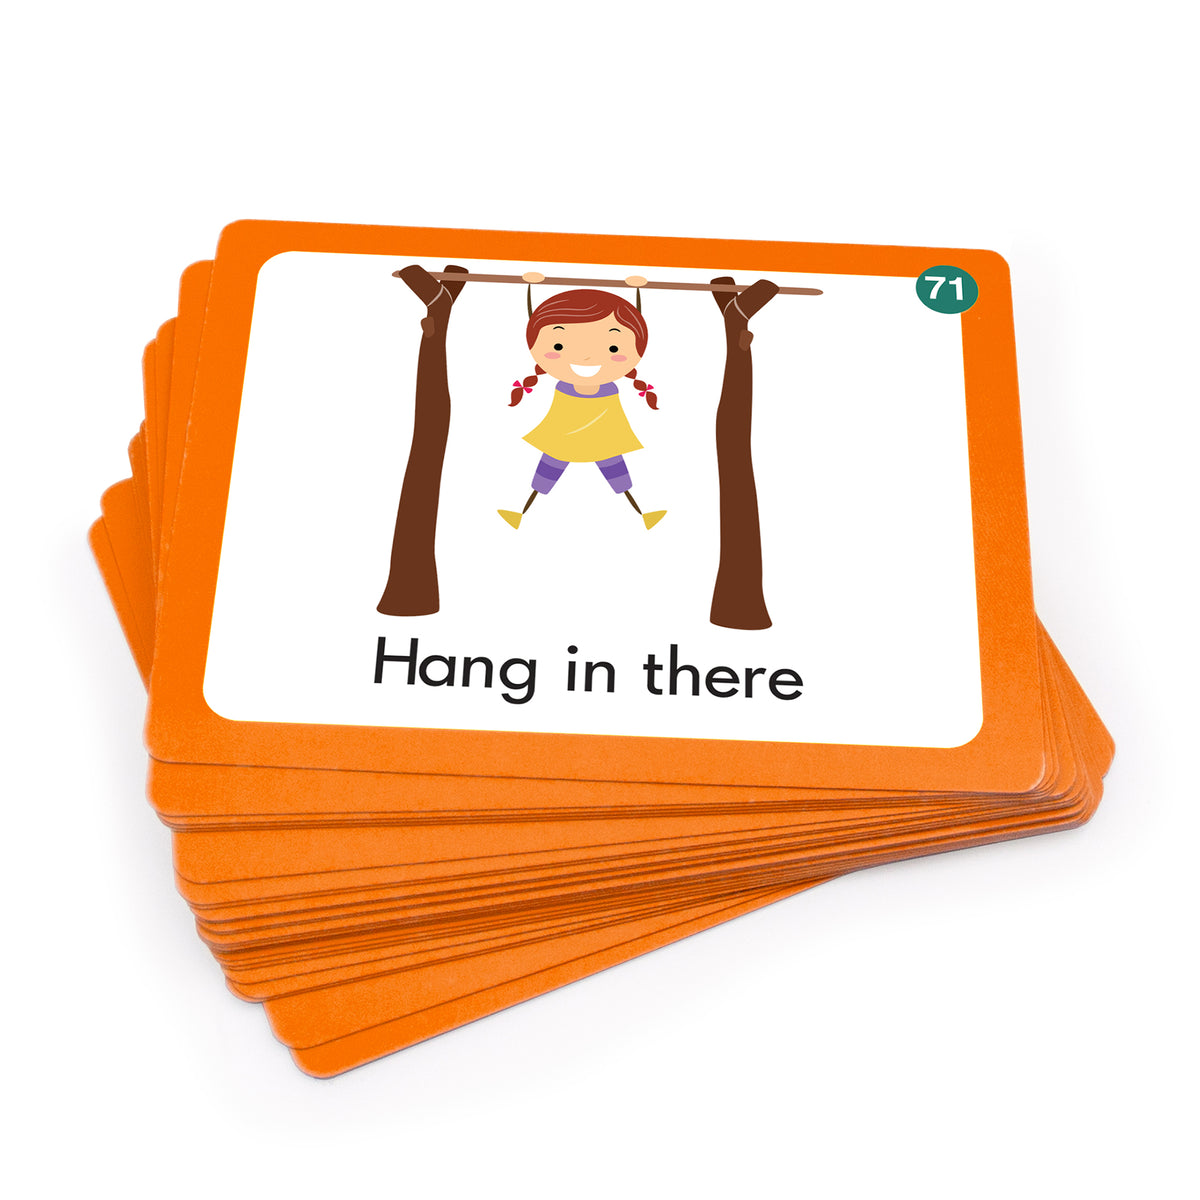 Junior Learning 100 Common Idioms sample cards